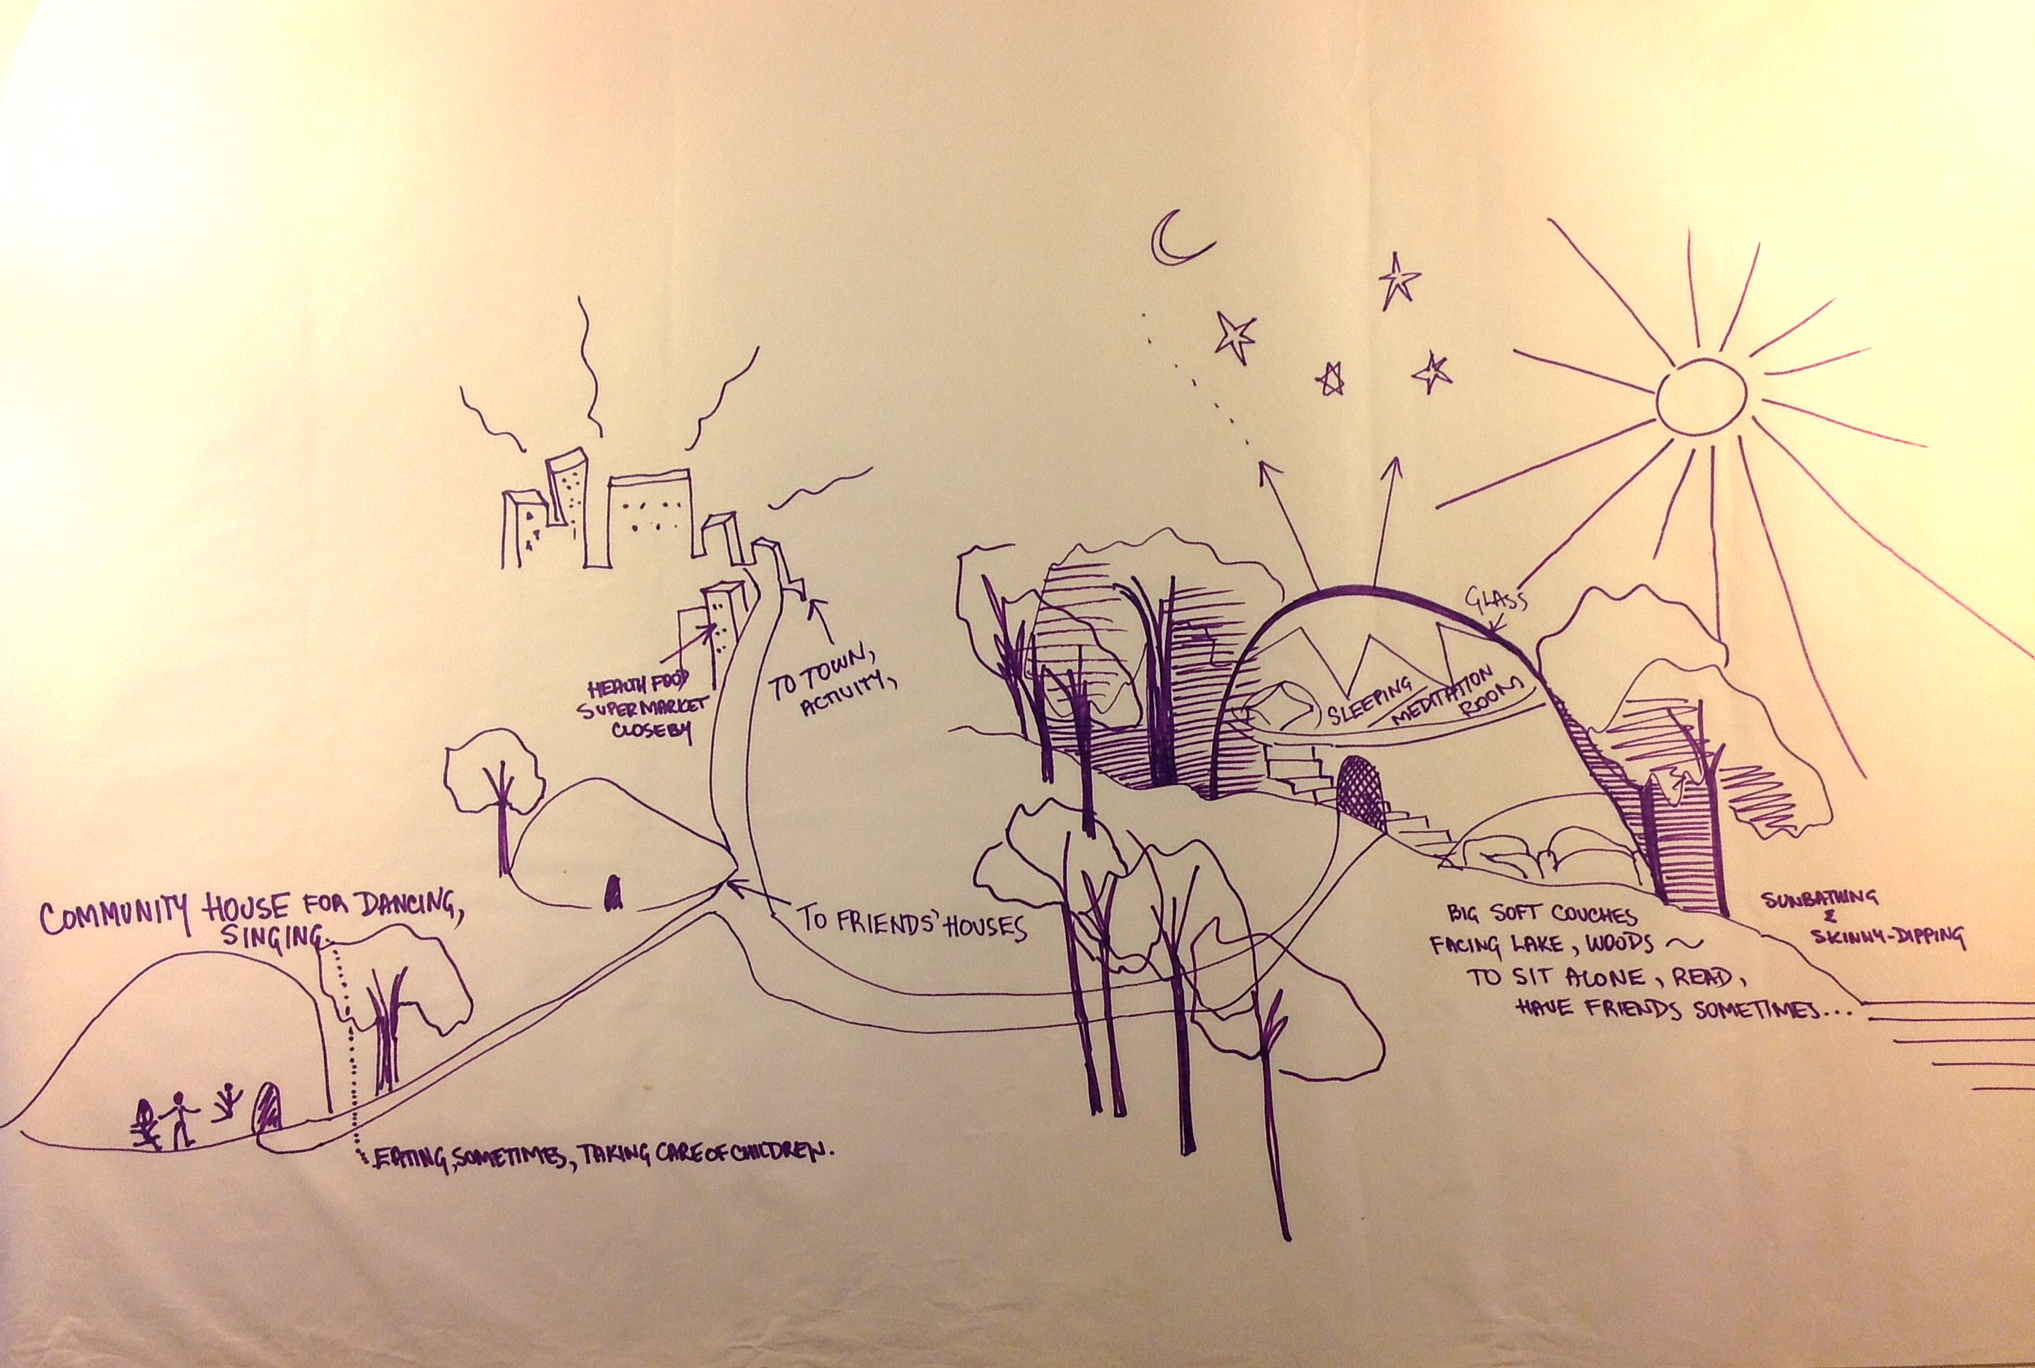 Work from an Environmental Fantasy Workshop. From the Sophia Smith Collection, Phyllis Birkby Papers, Smith College.